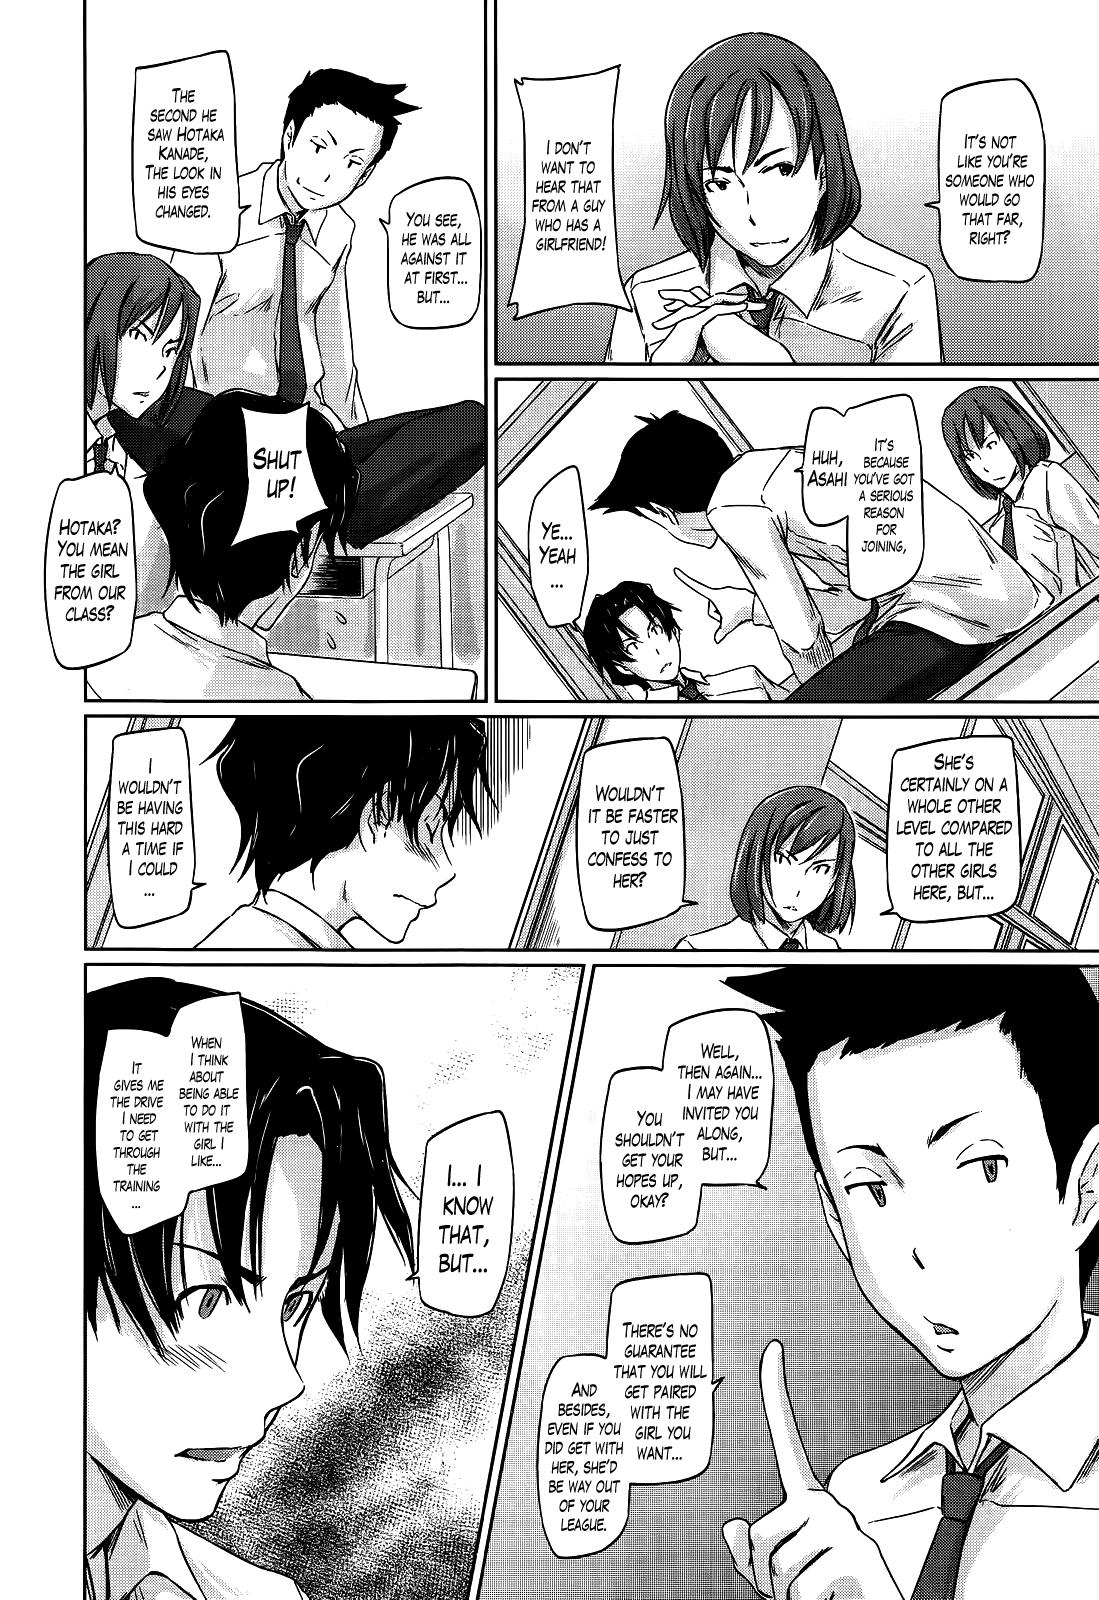 Uniform A Straight Line To Love, chapter 1 Dance - Page 4